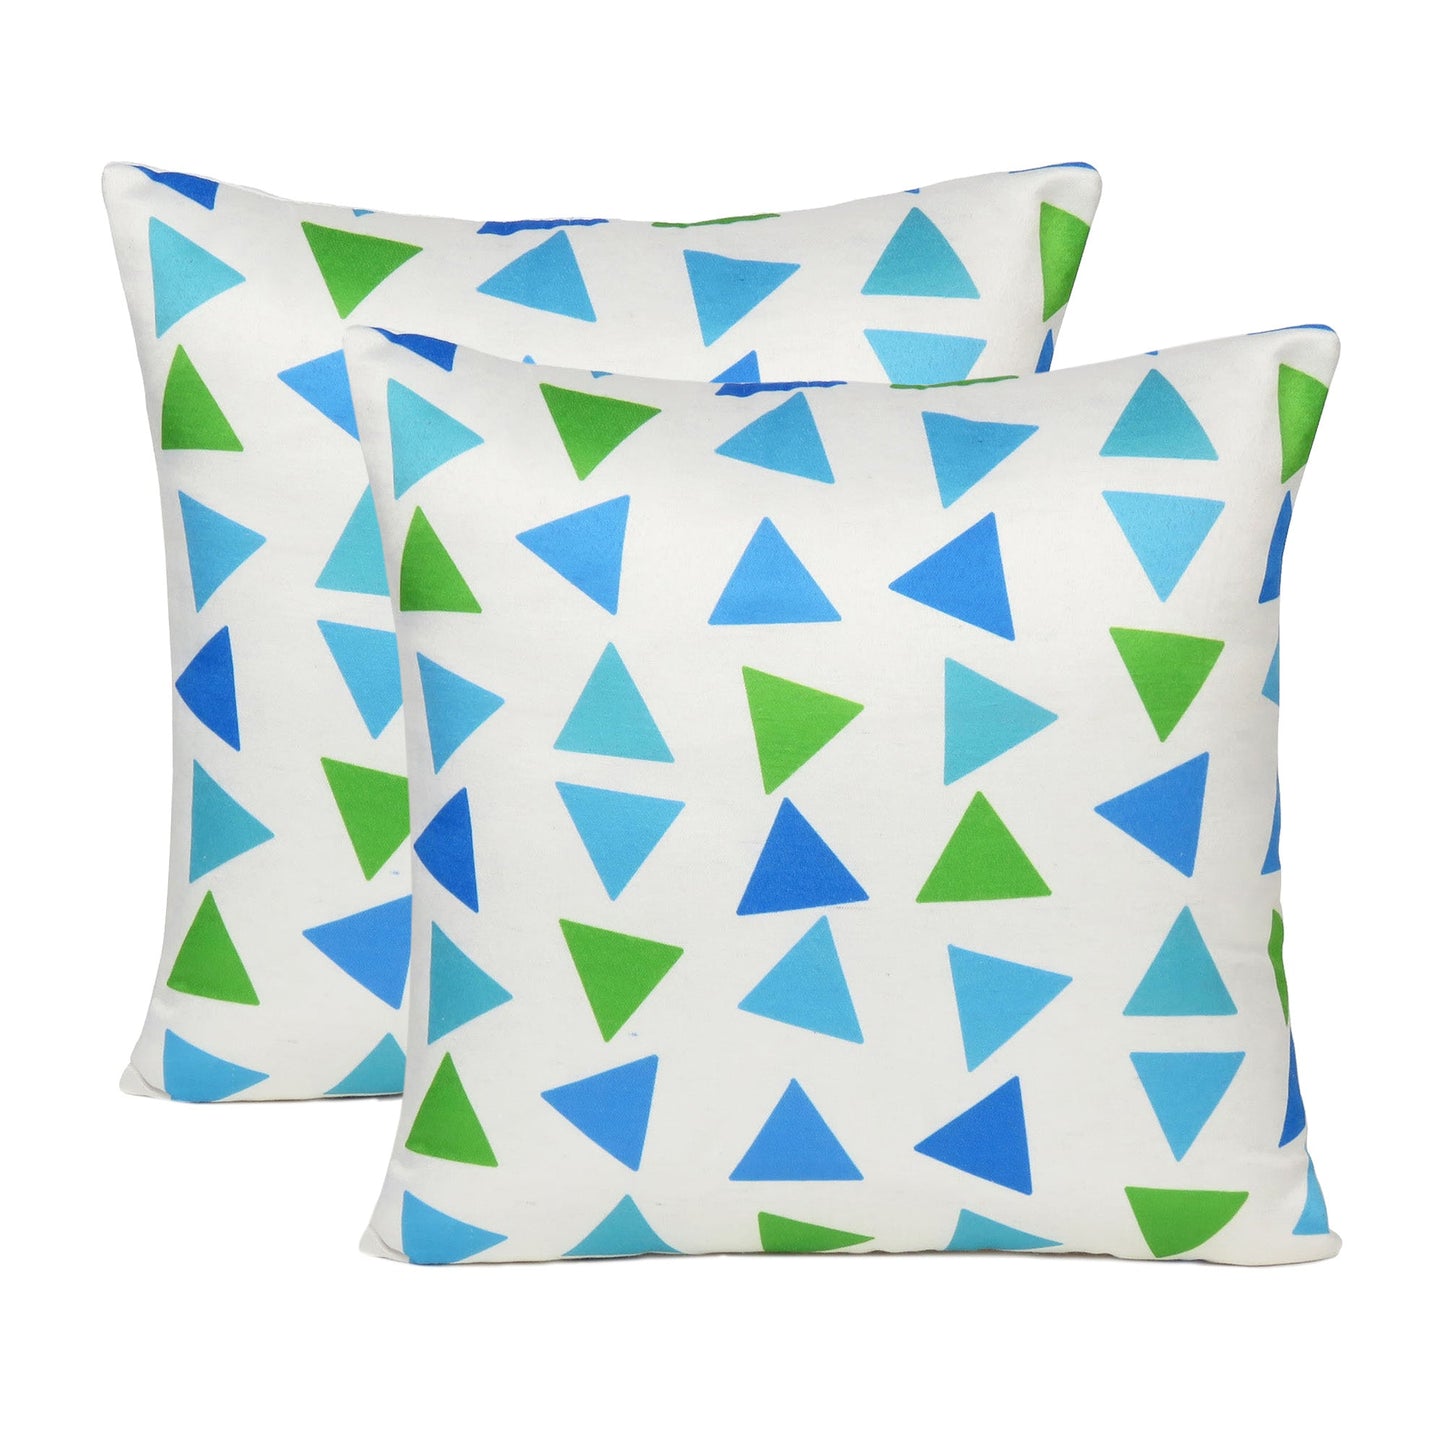 Multicolor Geometric Printed Cushion Cover in Set of 2